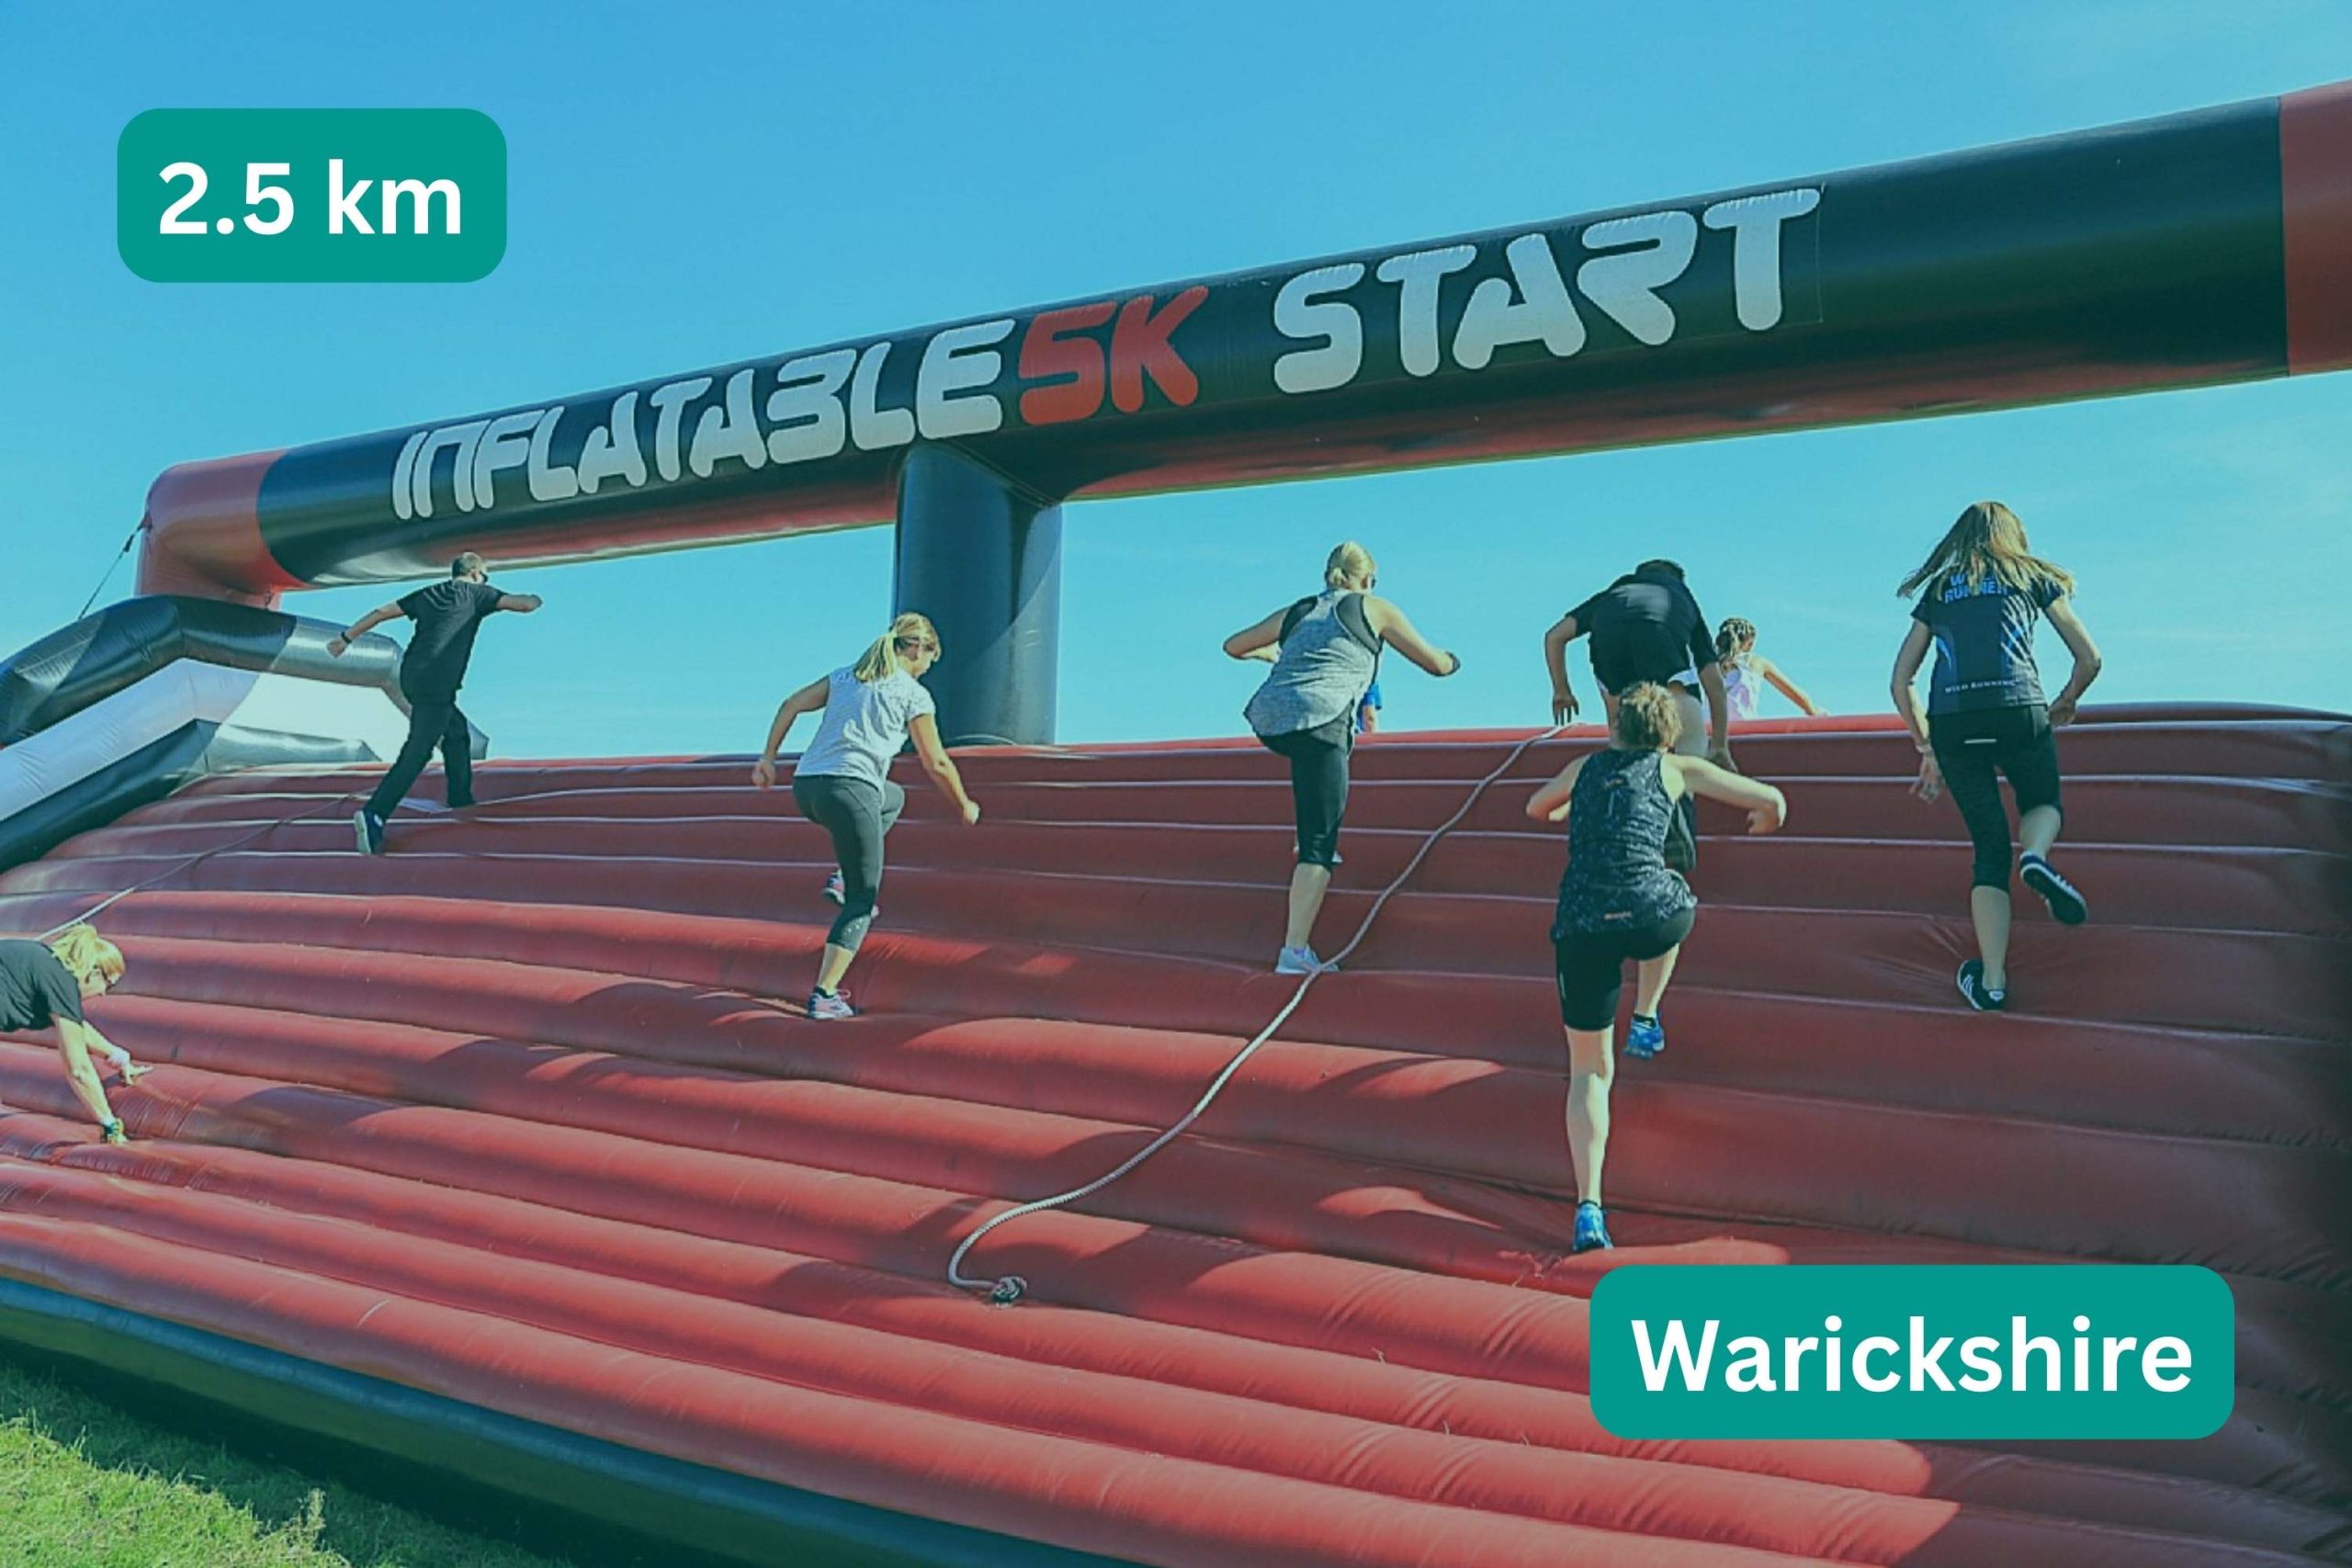 People running over inflatable obstical start line. Title text: 2.5km, Warickshire